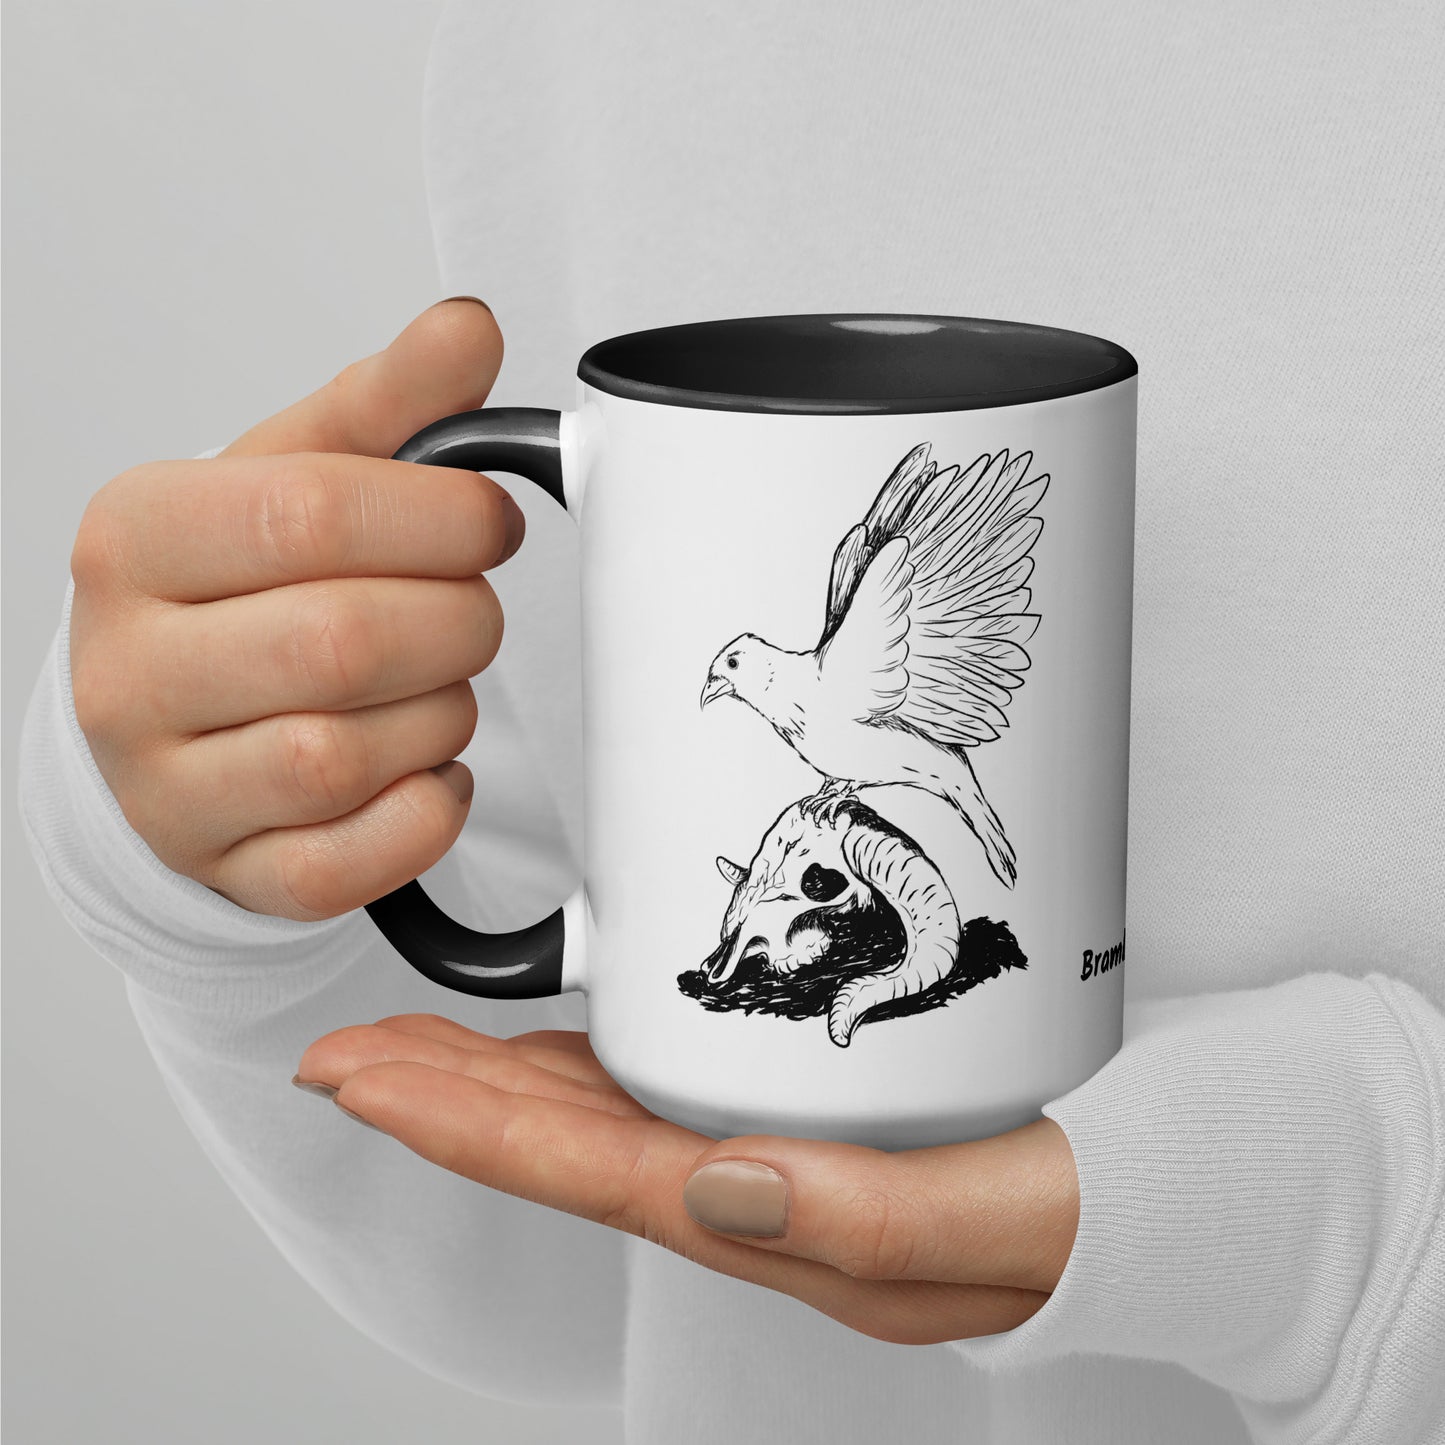 15 ounce white ceramic mug with black handle and inside. Features a double sided print of Reflections, a design with a crow sitting on a sheep skull. Dishwasher and microwave safe. Shown in model's hands.